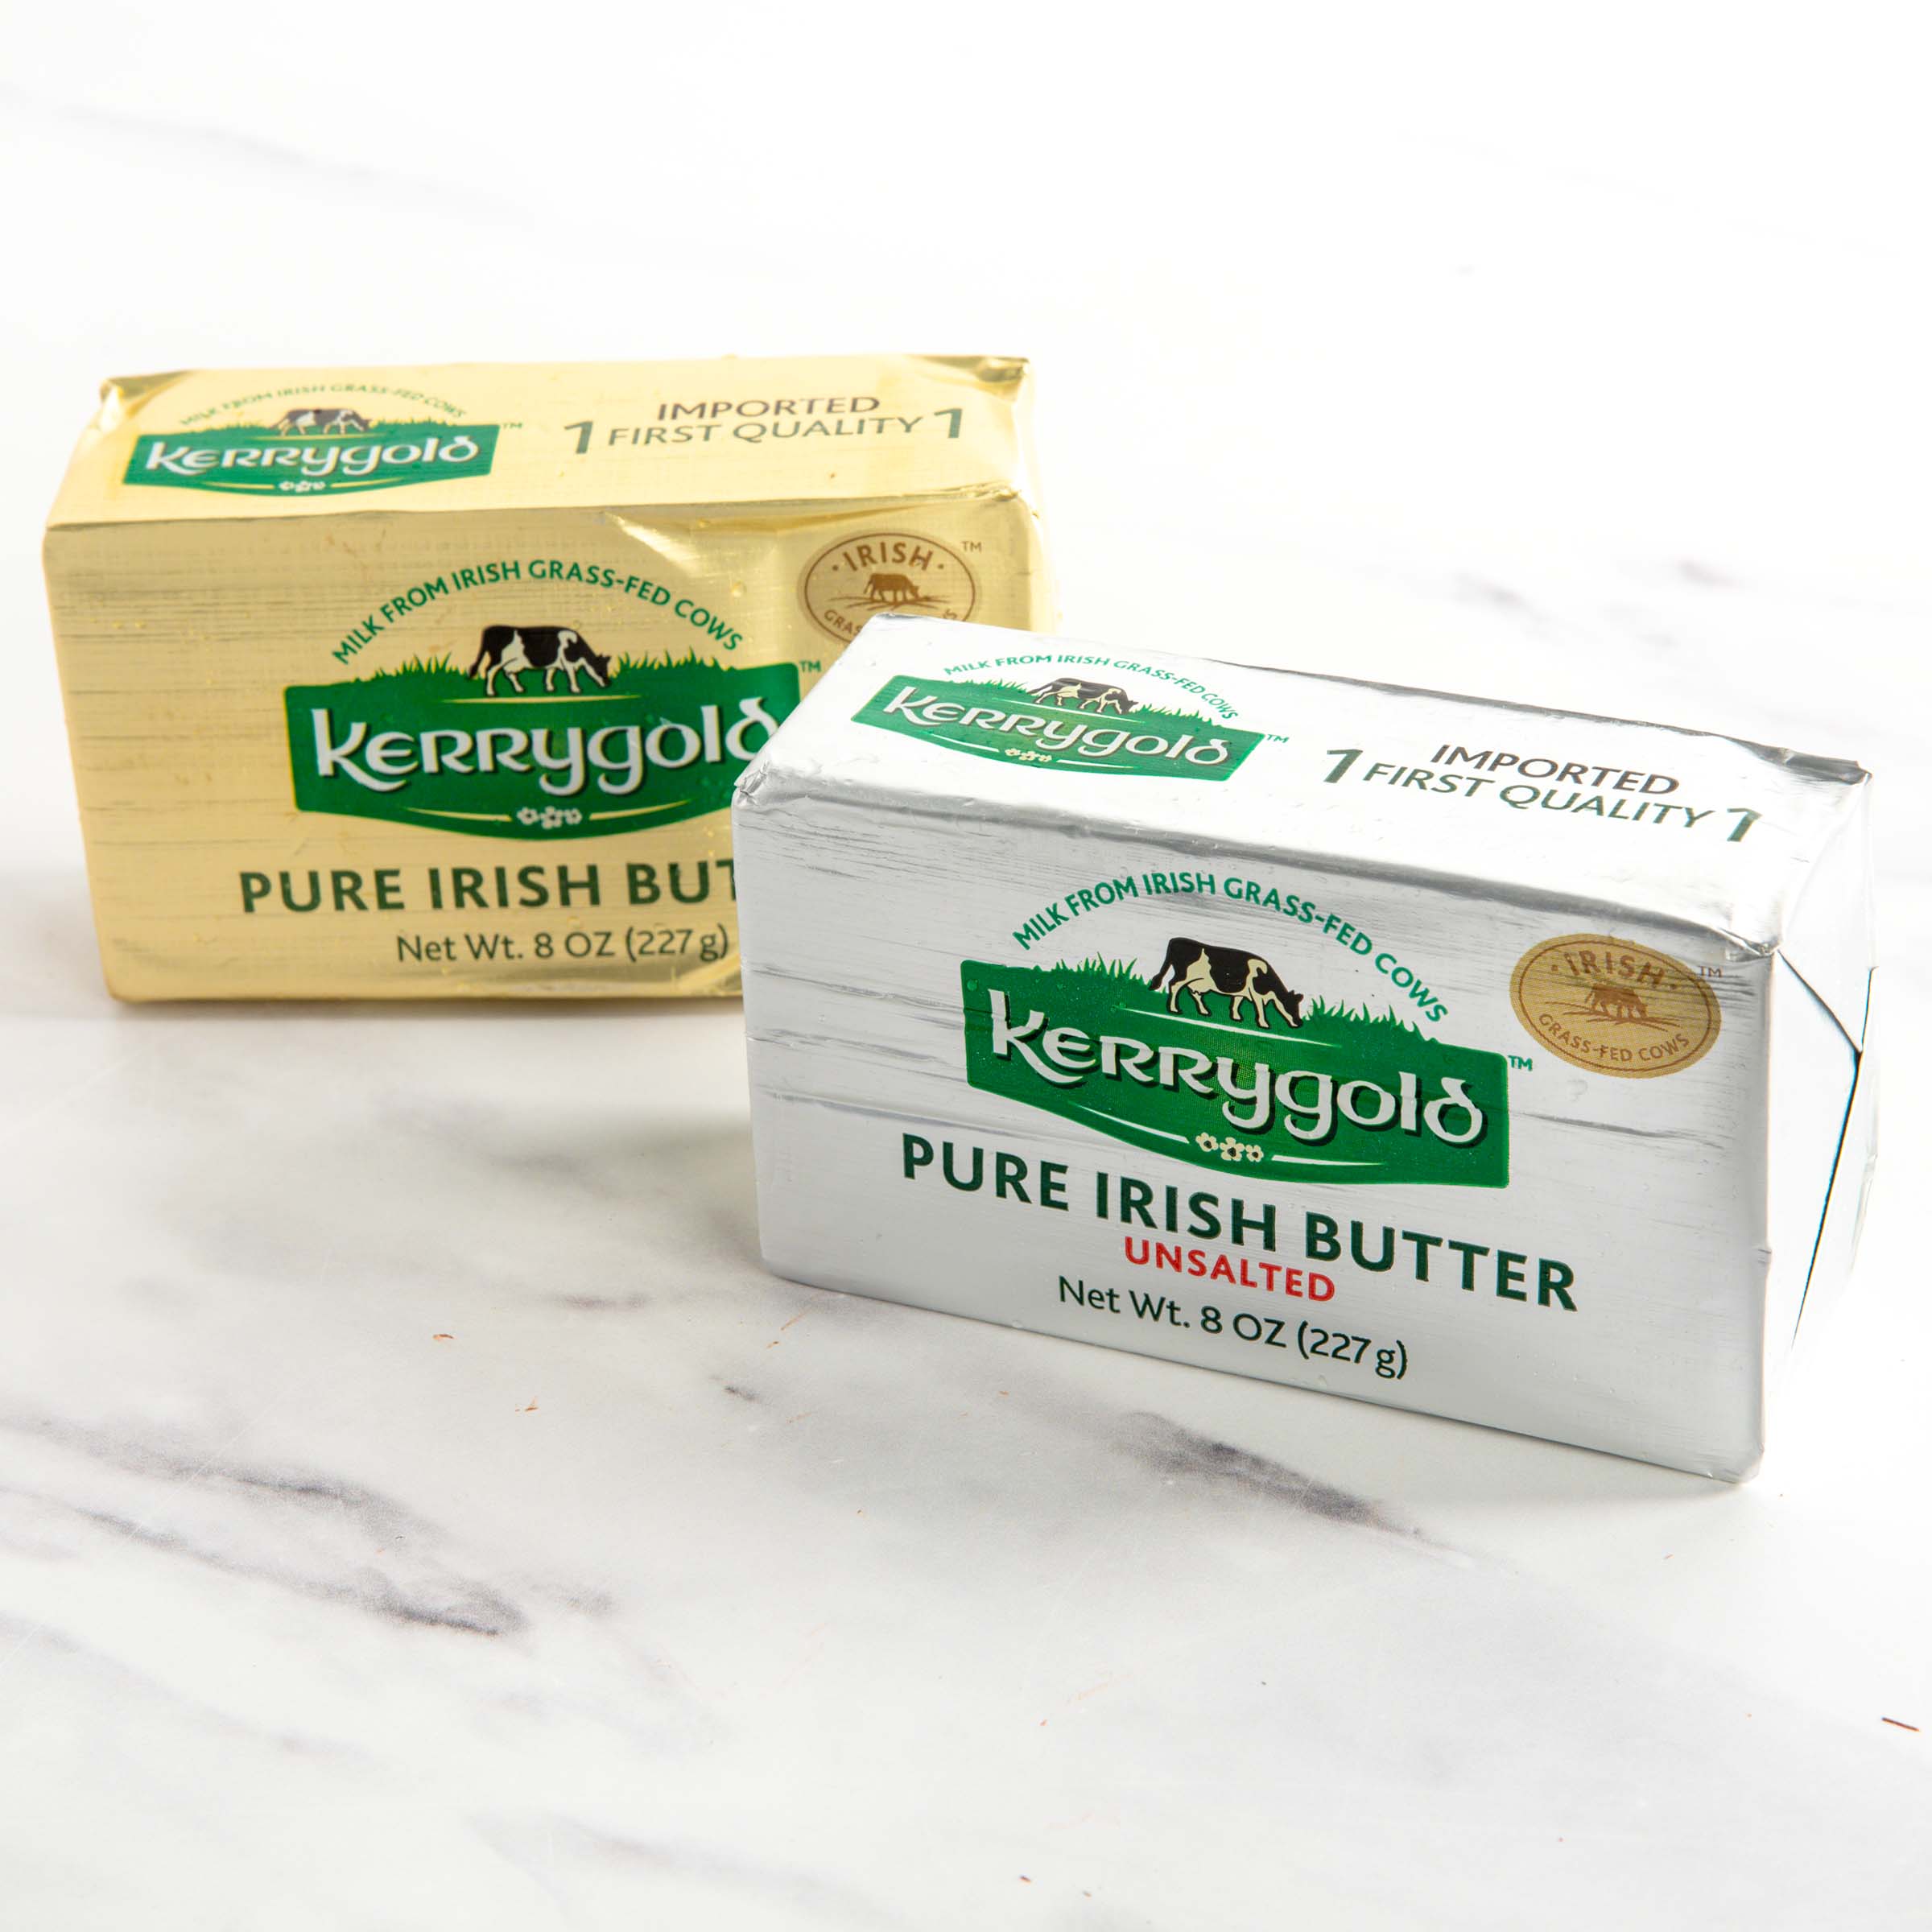 Which Grass-Fed Butter is the Best? - A Review of 5 Grass-Fed